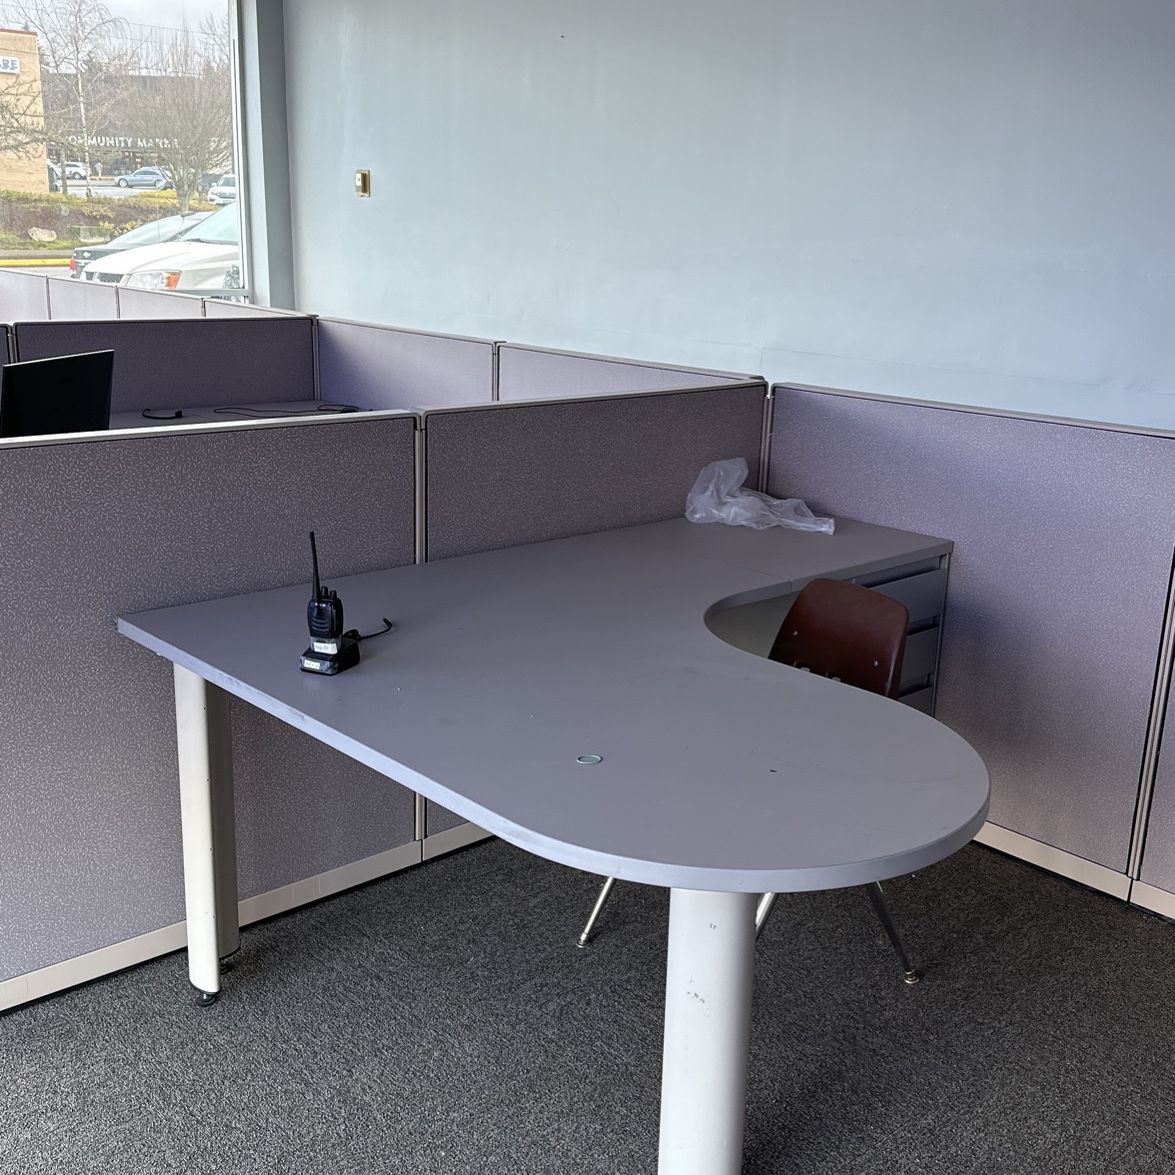 5 office Table For Free first Come First serve 